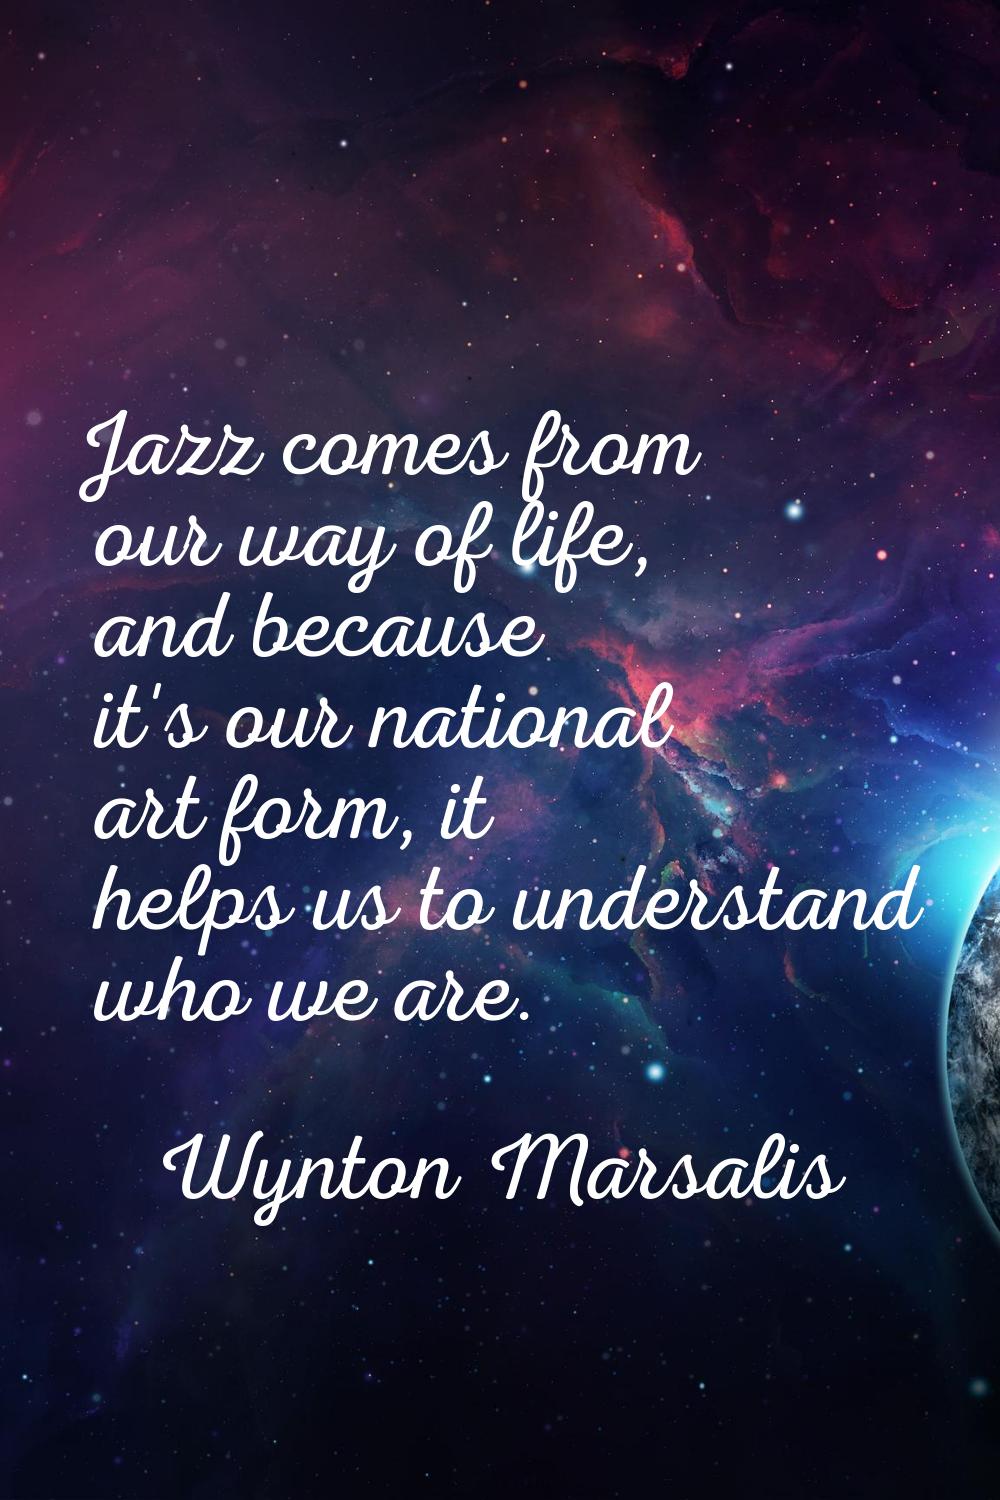 Jazz comes from our way of life, and because it's our national art form, it helps us to understand 